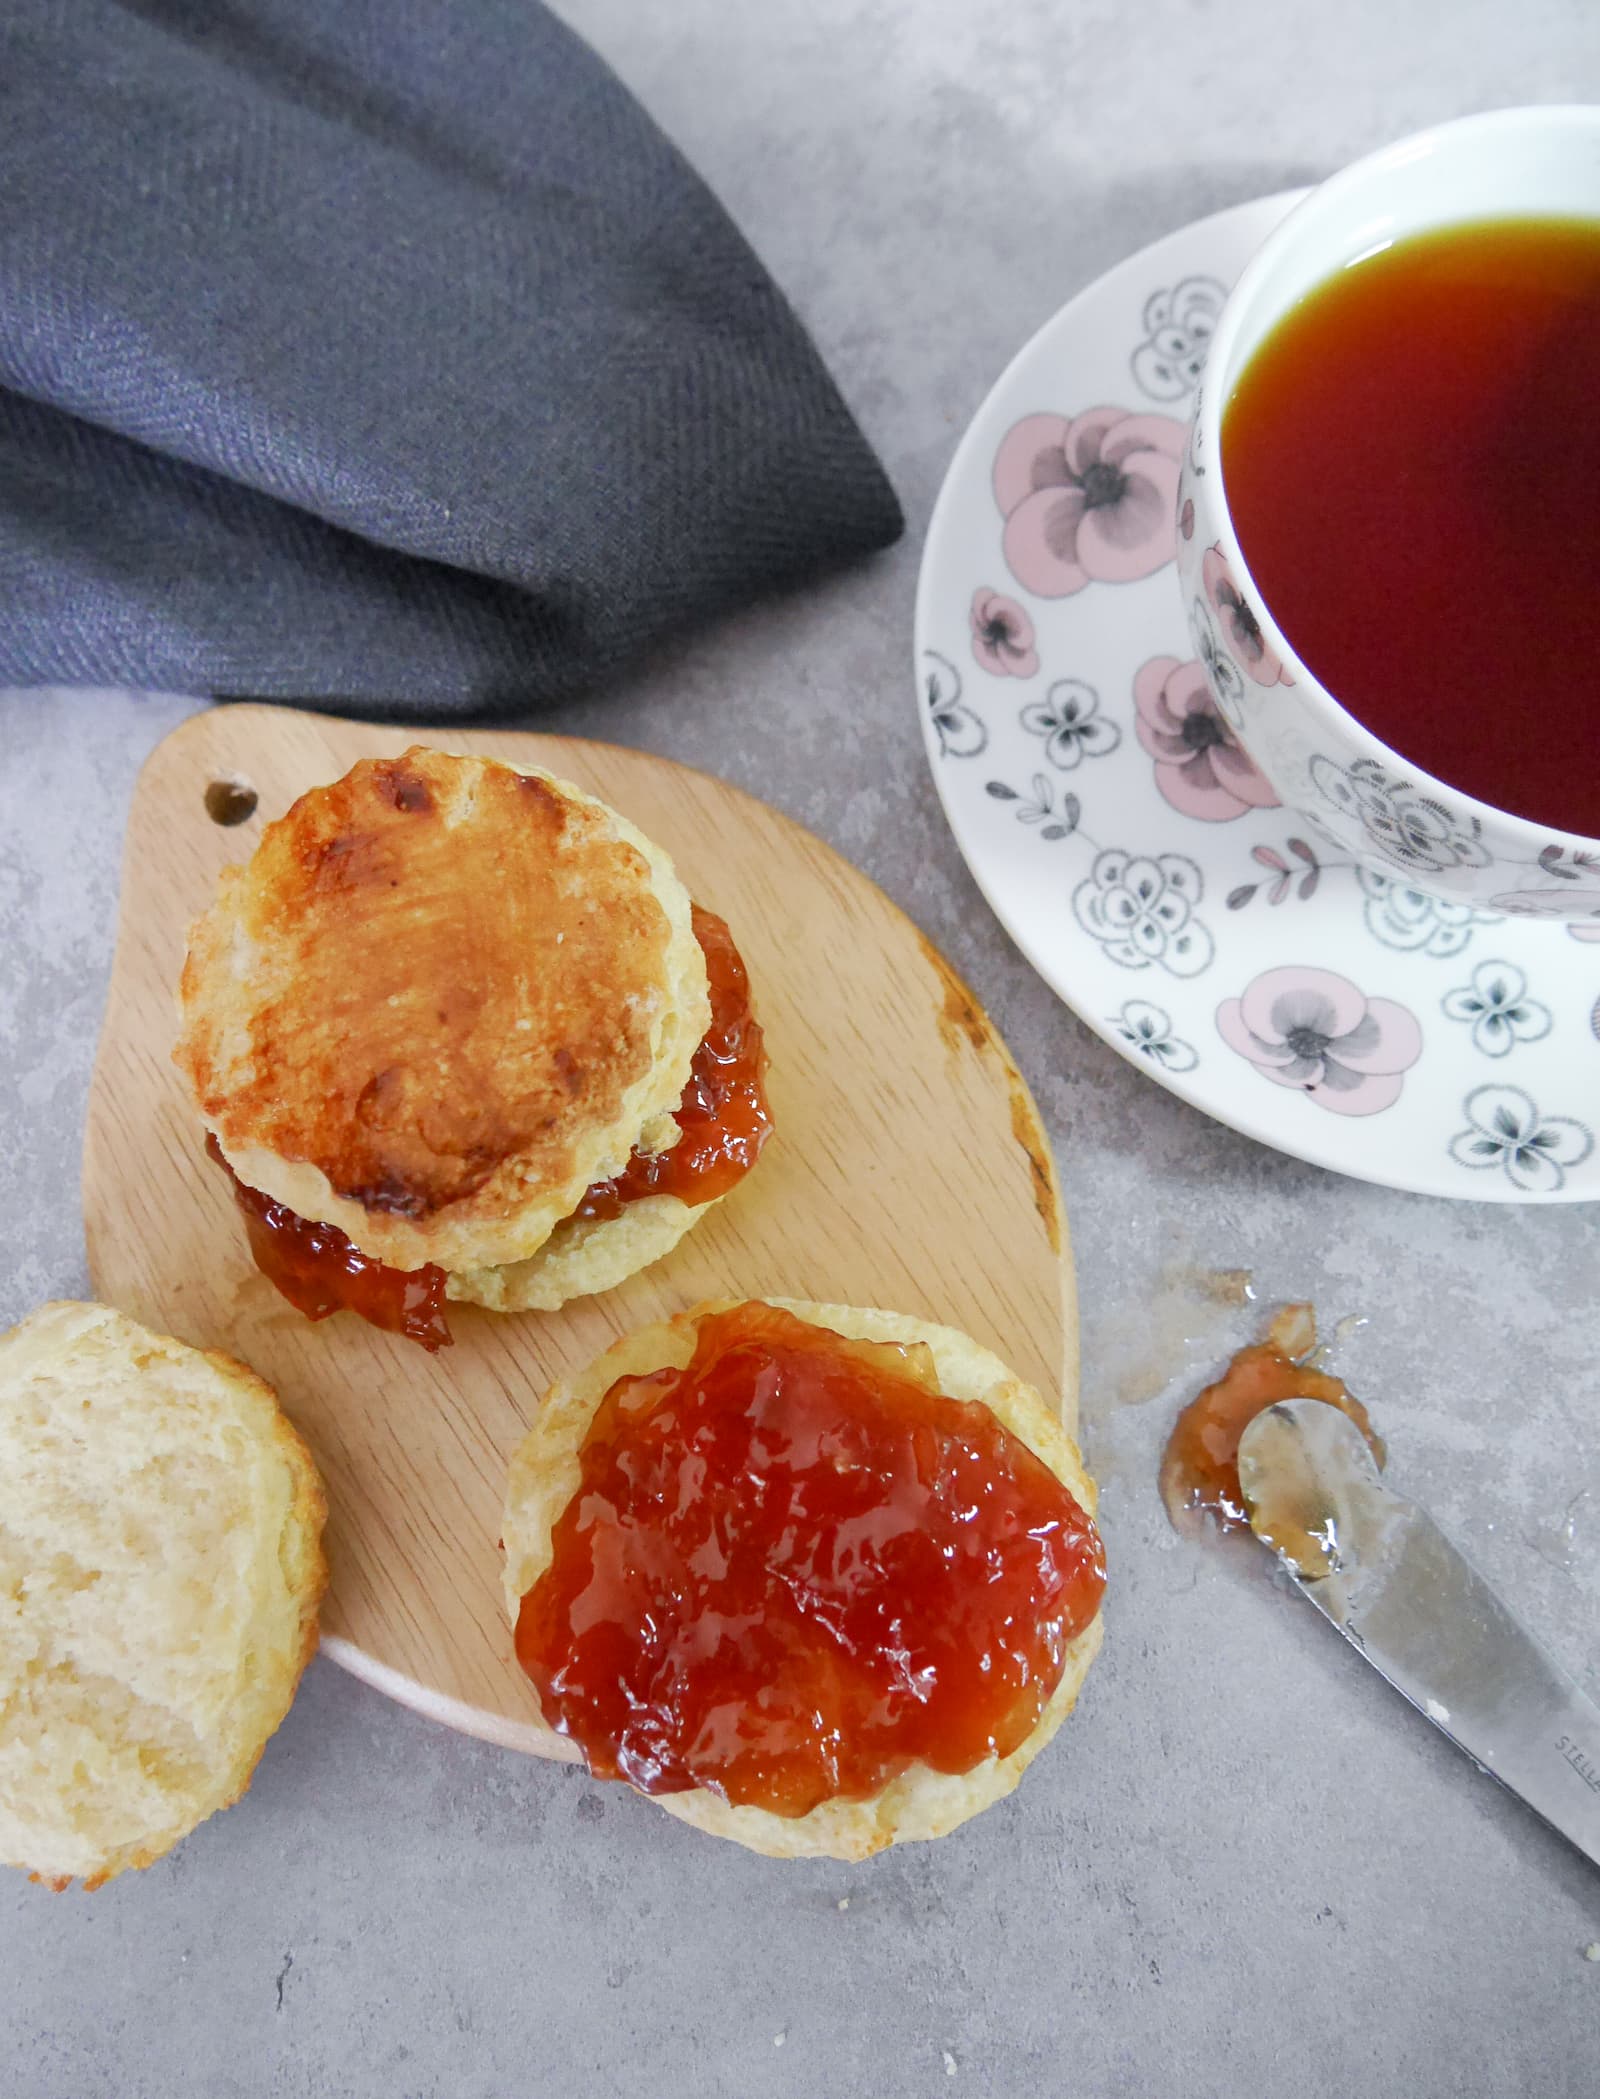 Two scones set filled with rhubarb jam and set on a wooden board, with a cup of tea alongside